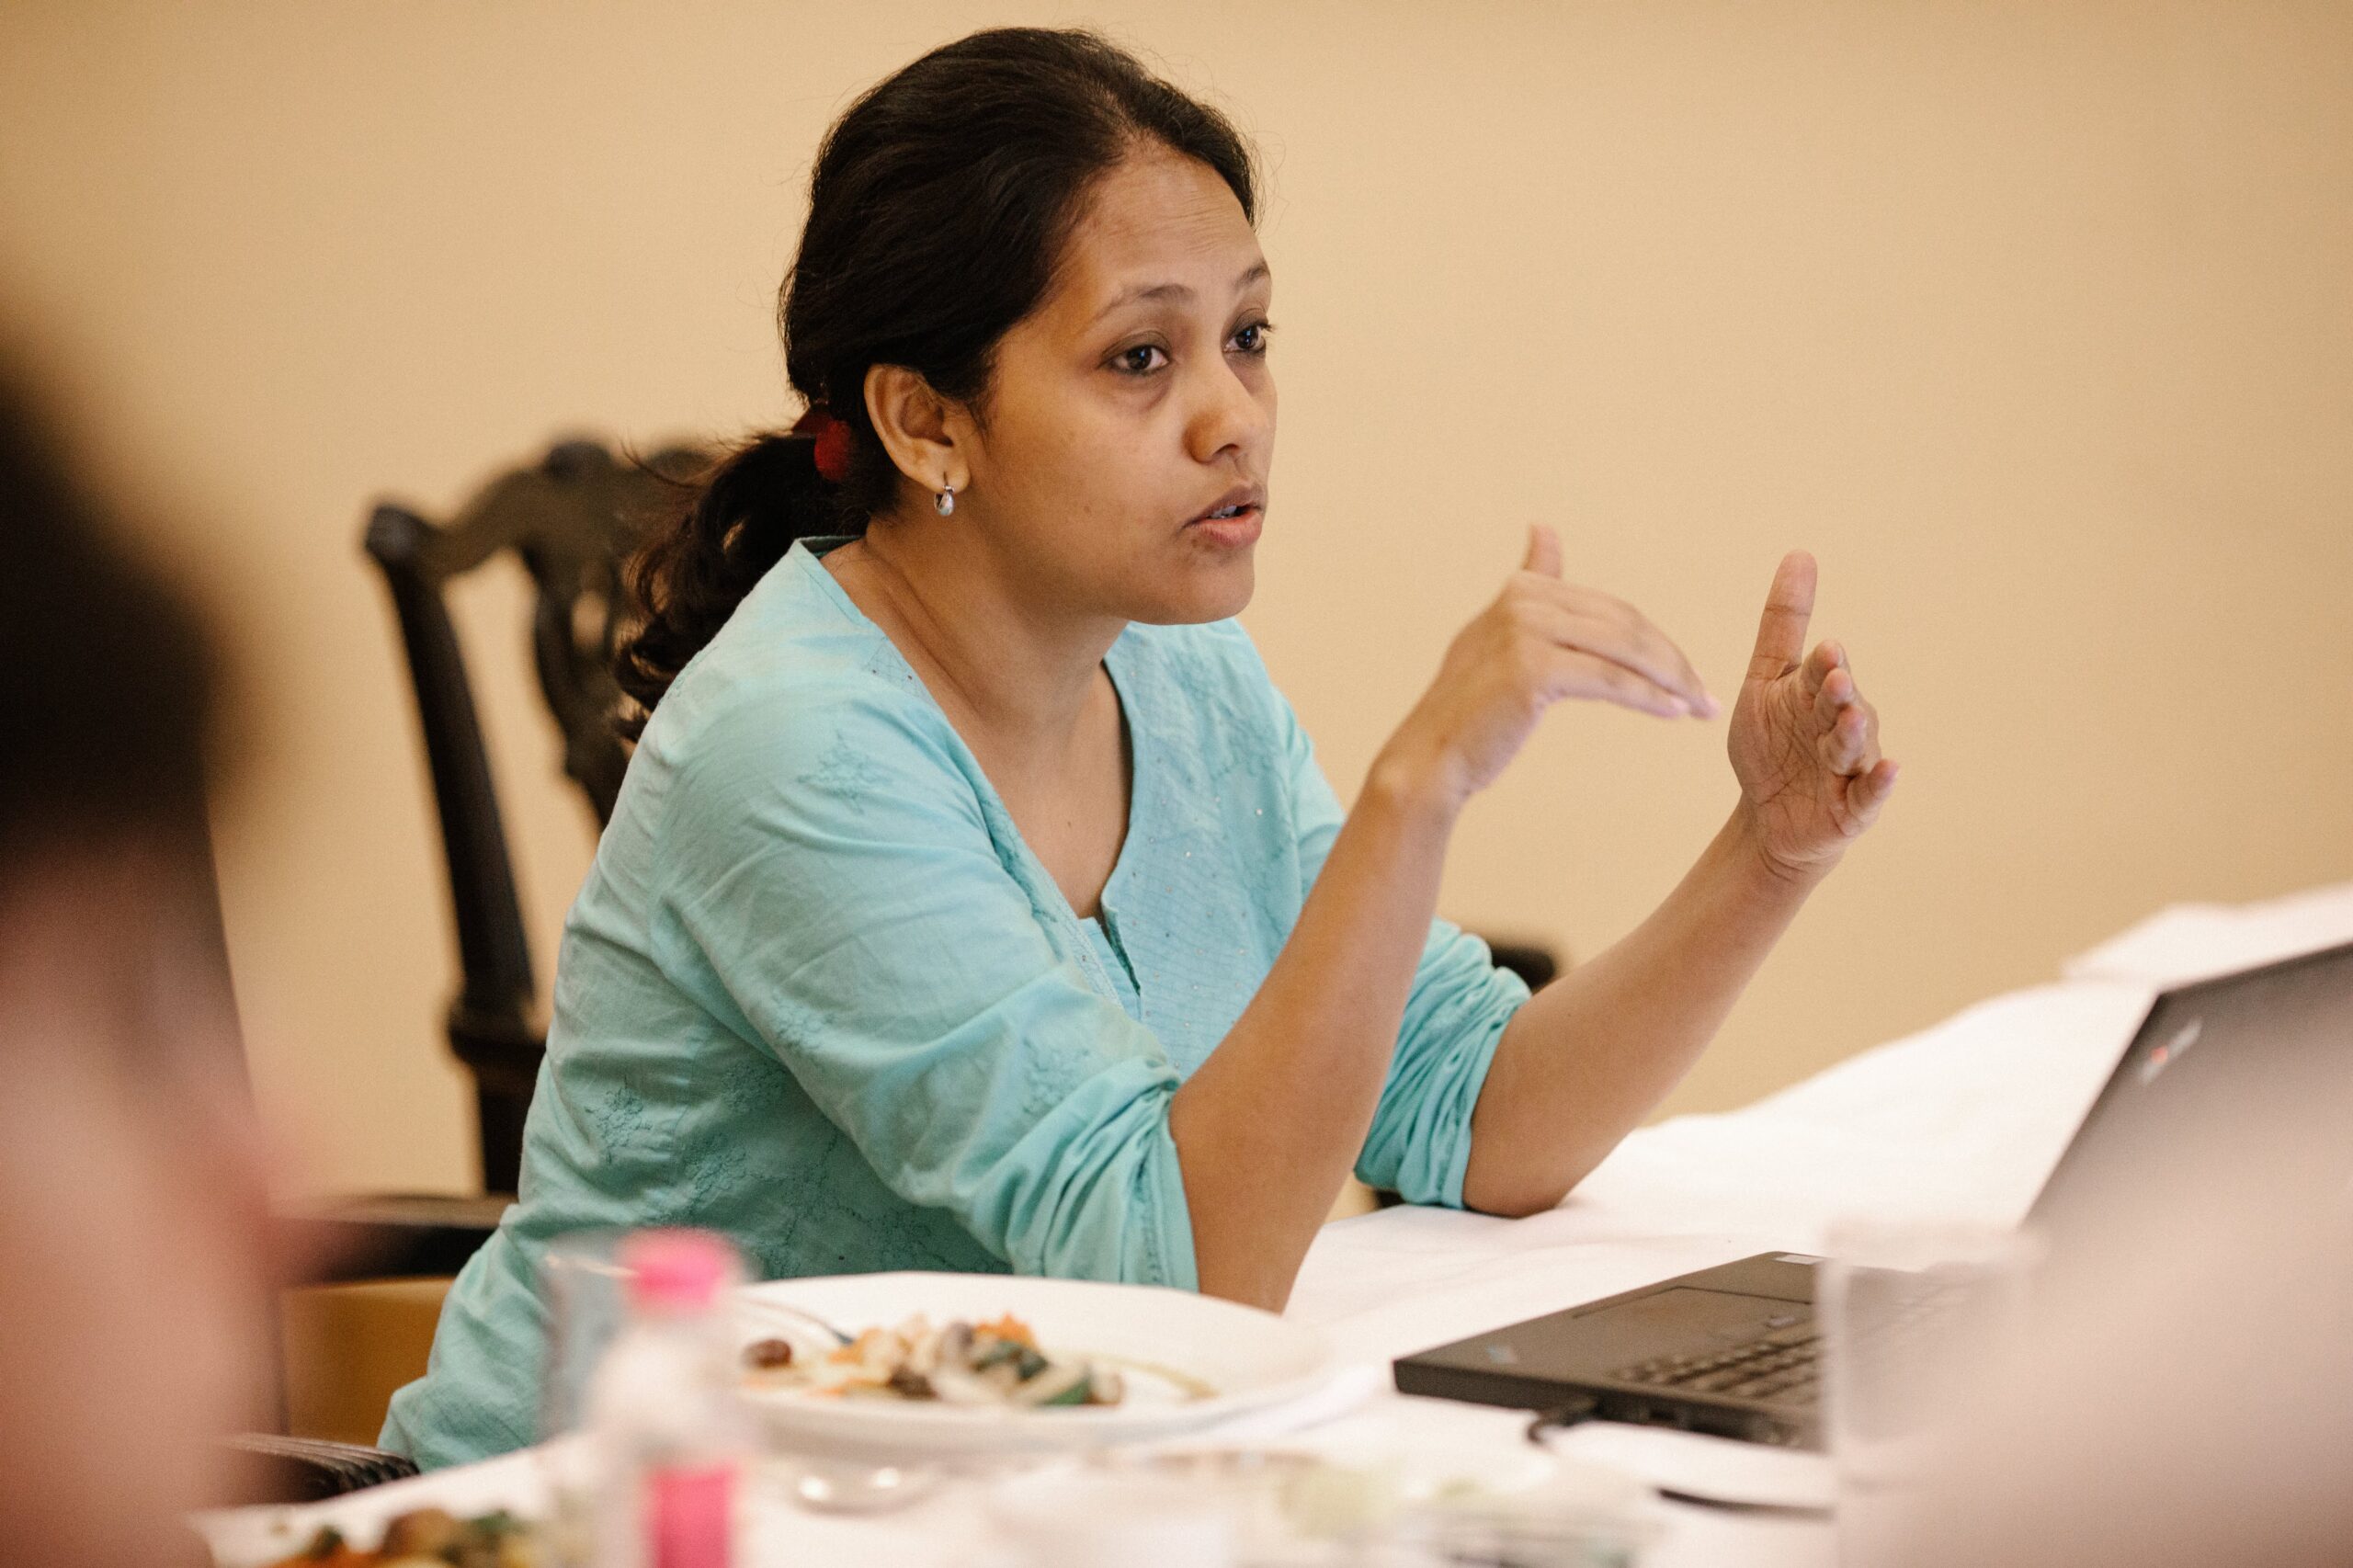 A young Indian woman in light green top and ponytail speaks at a table during a meeting